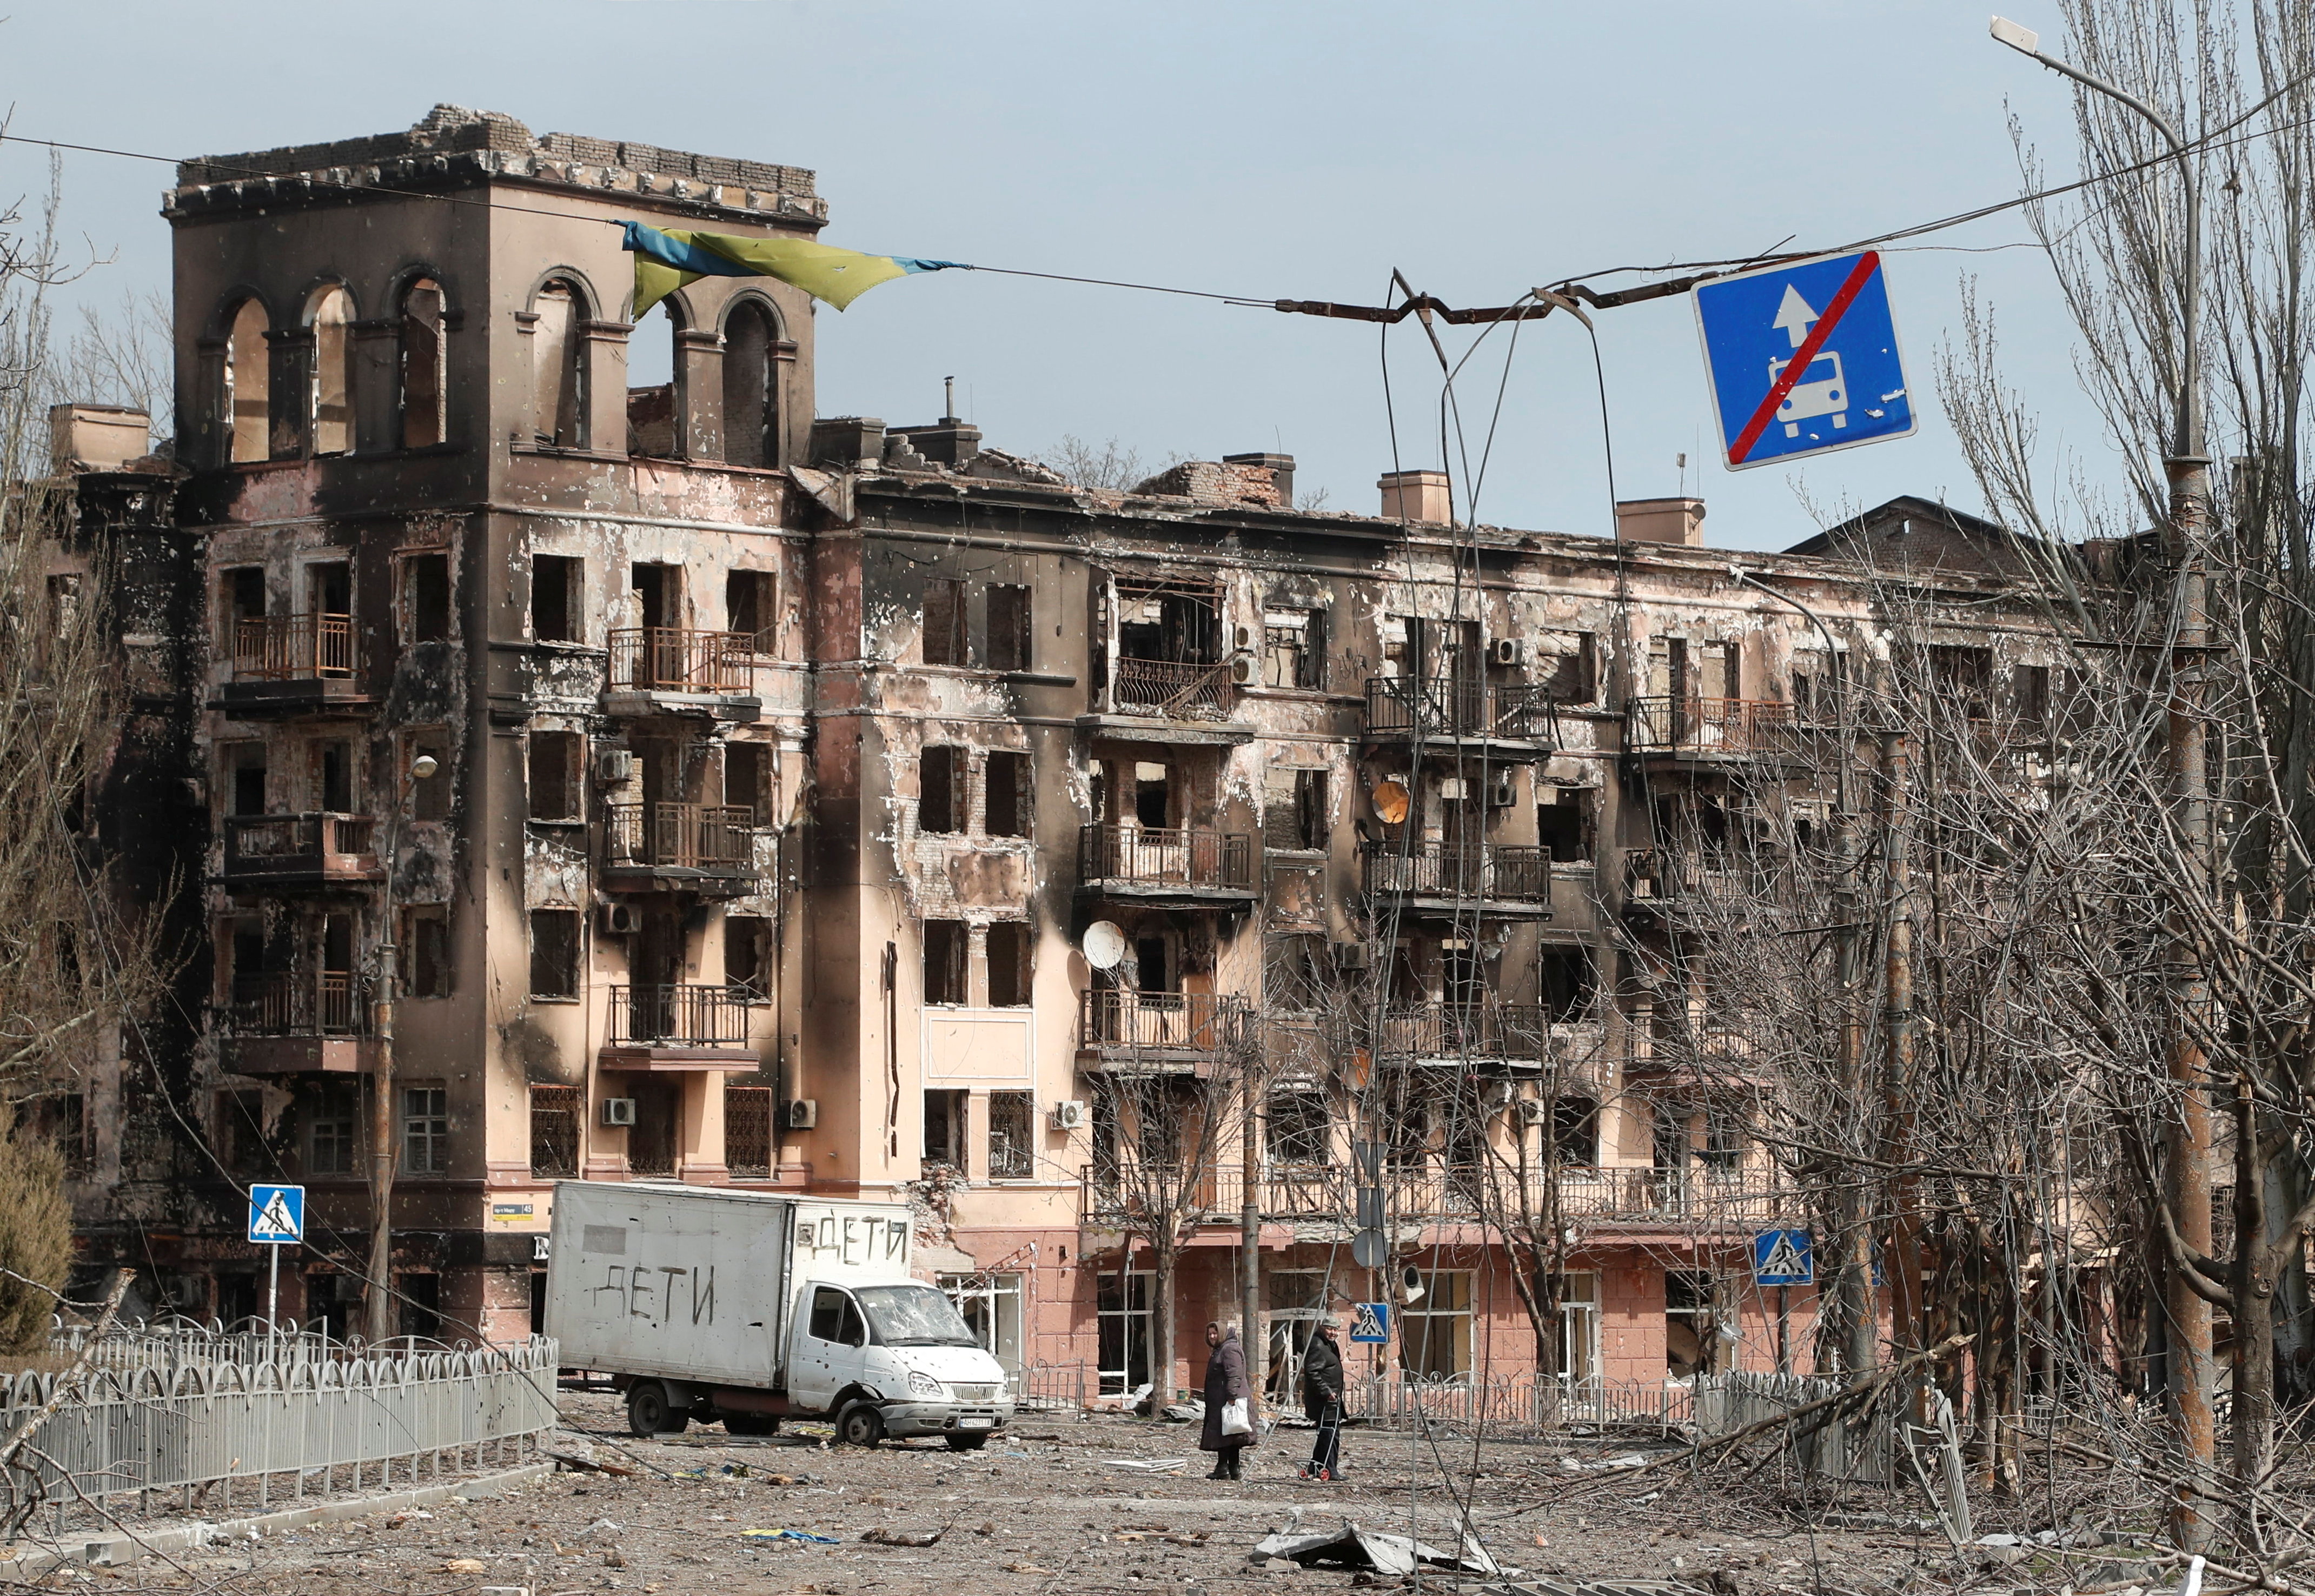 Local residents walk along a street next to a damaged building in Mariupol